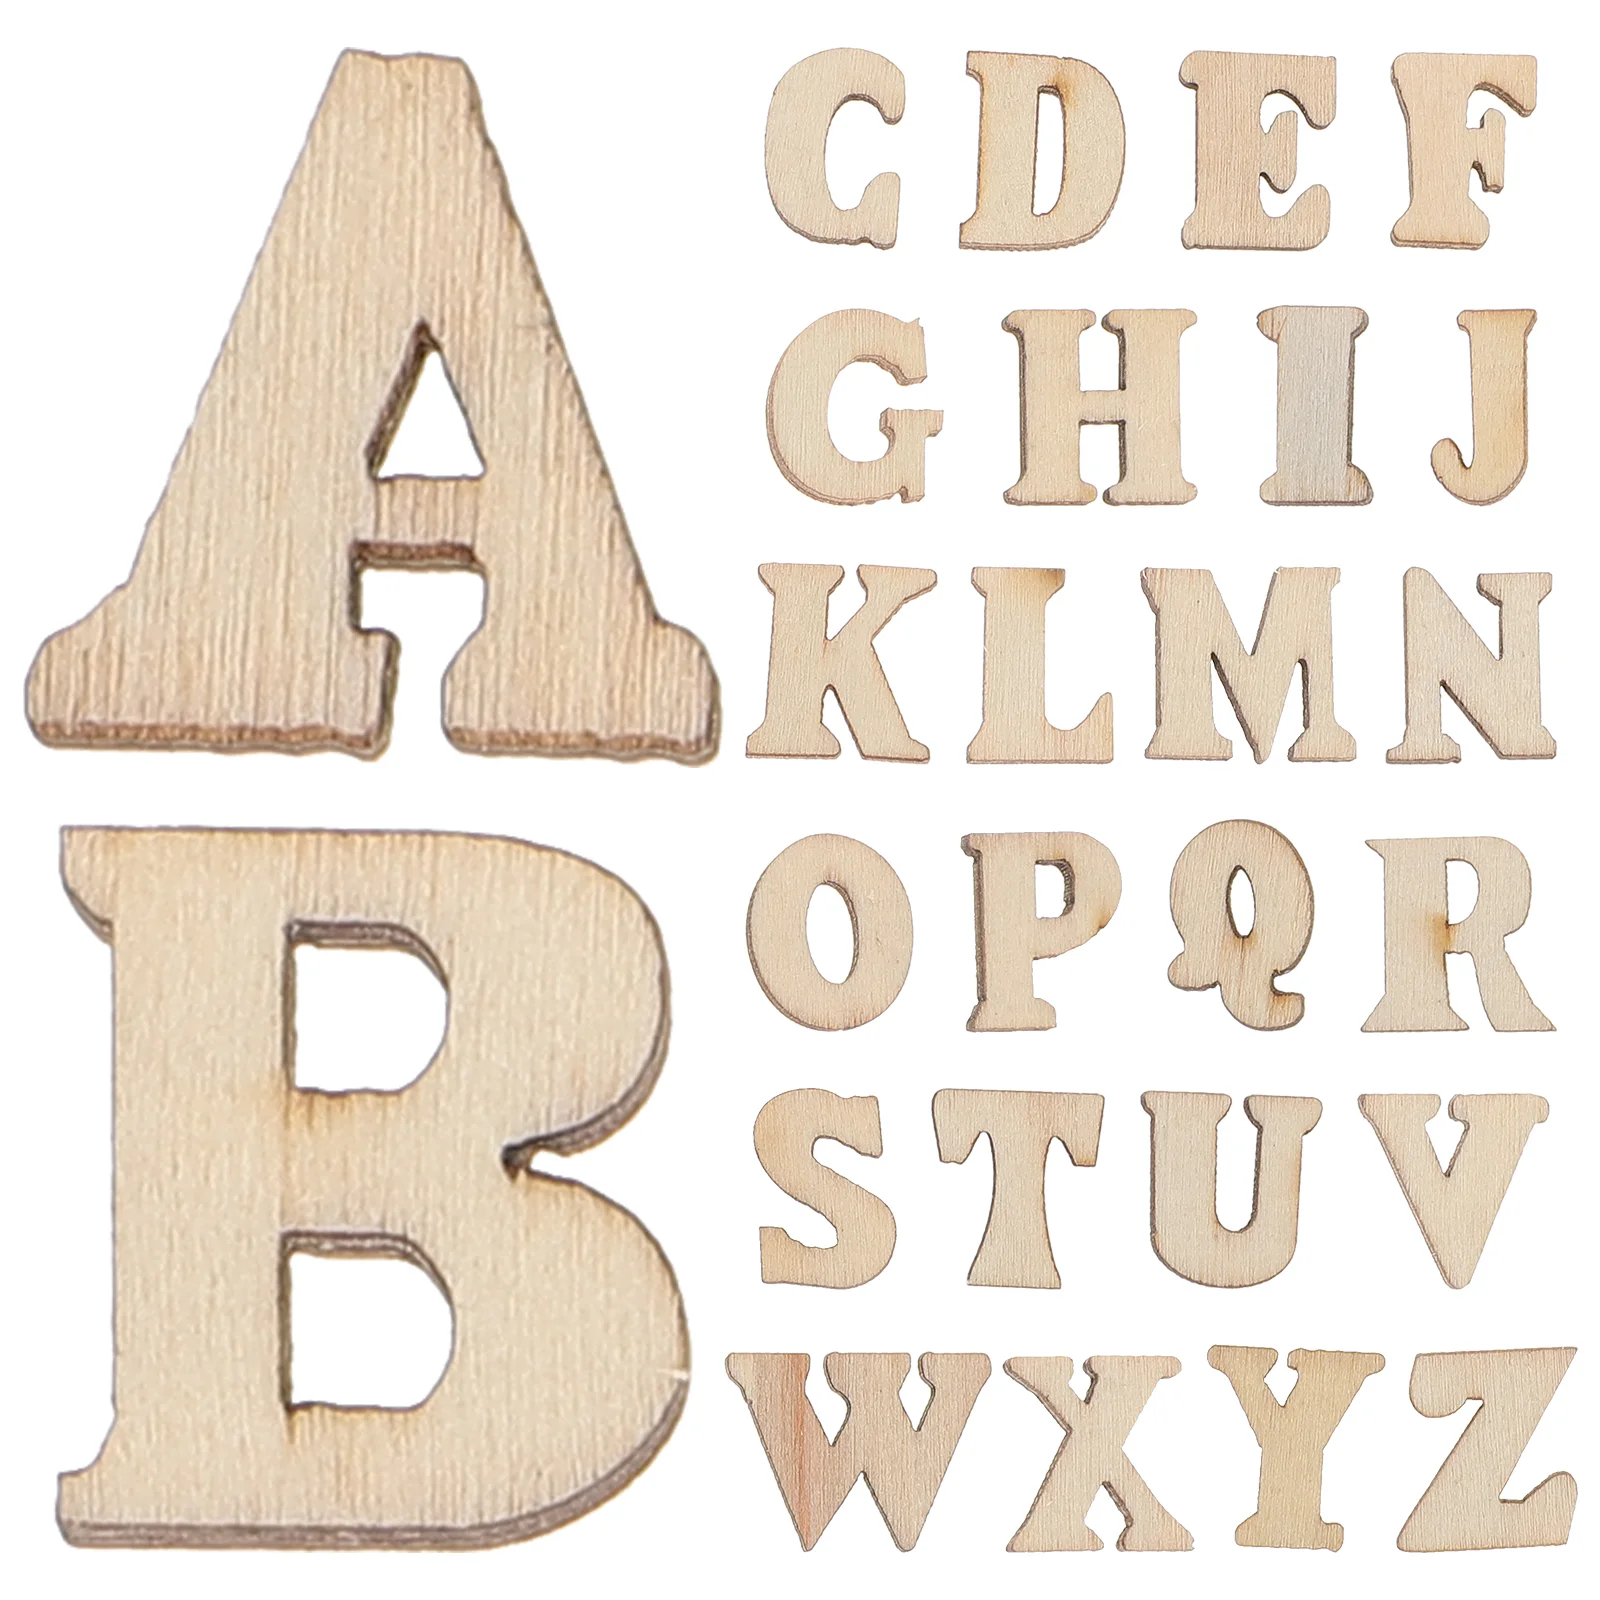 

Wooden Letters Wood Slice Crafts Craft Alphabet Letter Embellishments Unfinished Christmas Diy Material Mini Decor Cutouts Wall